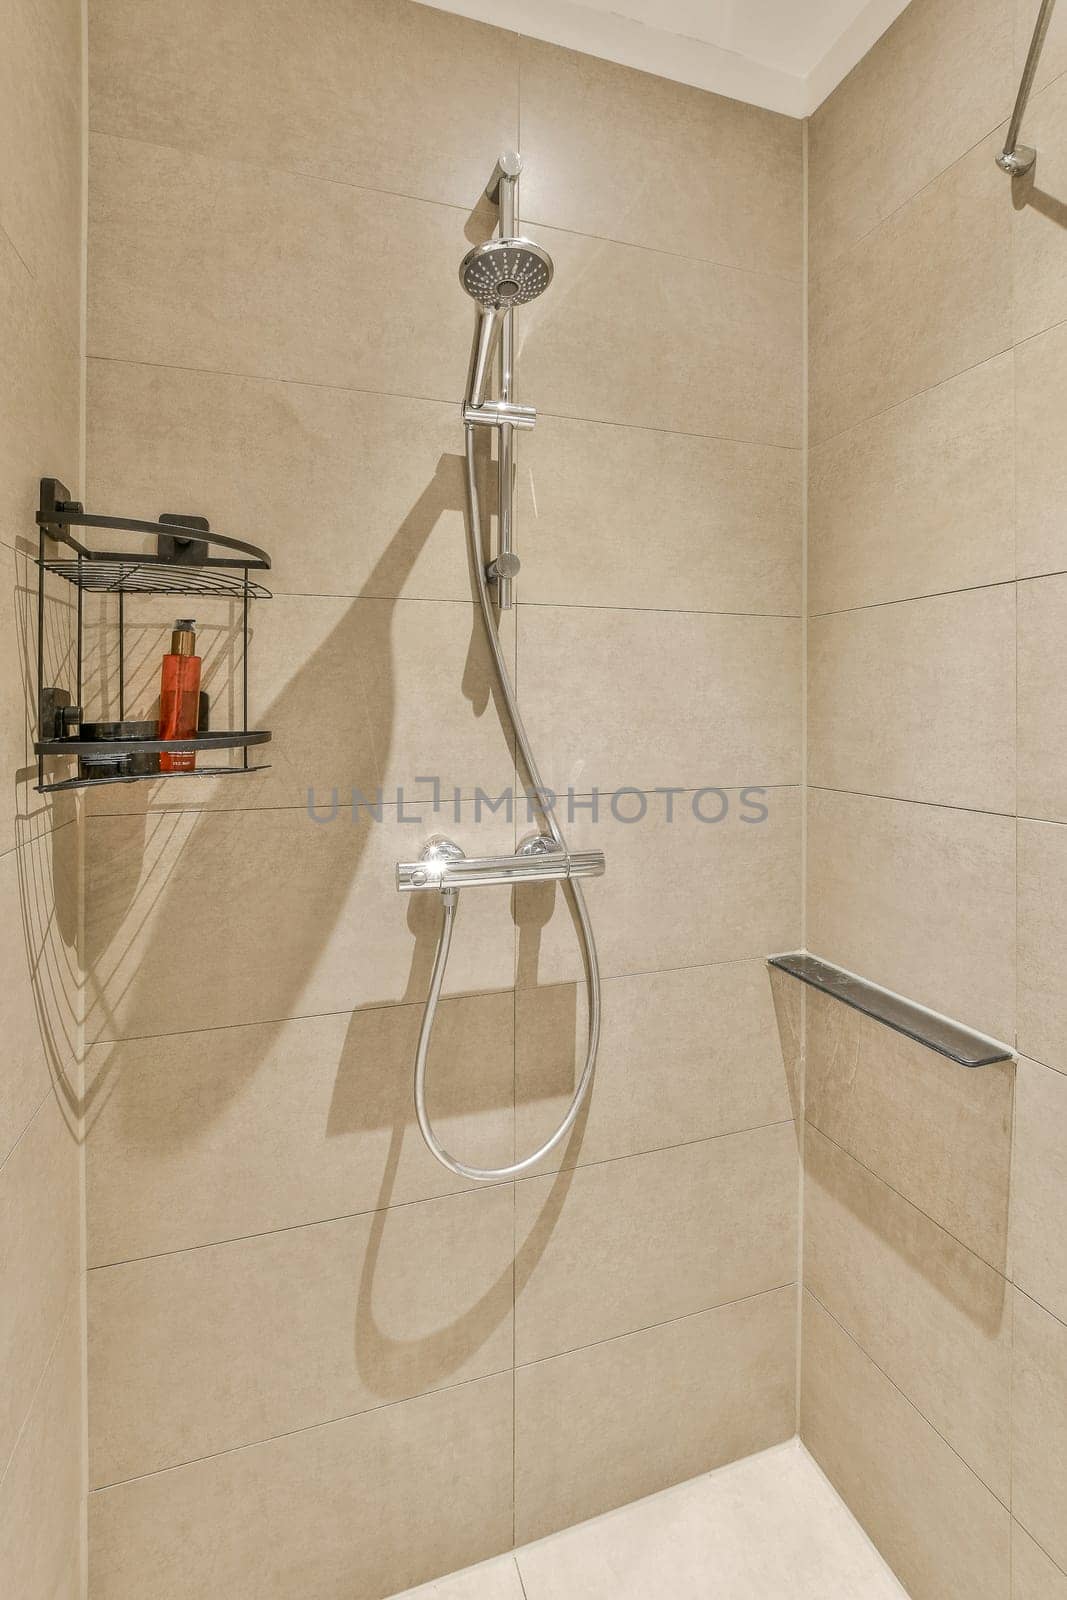 a shower stall in a bathroom with tile walls and white tiles on the wall behind it is a towel rack